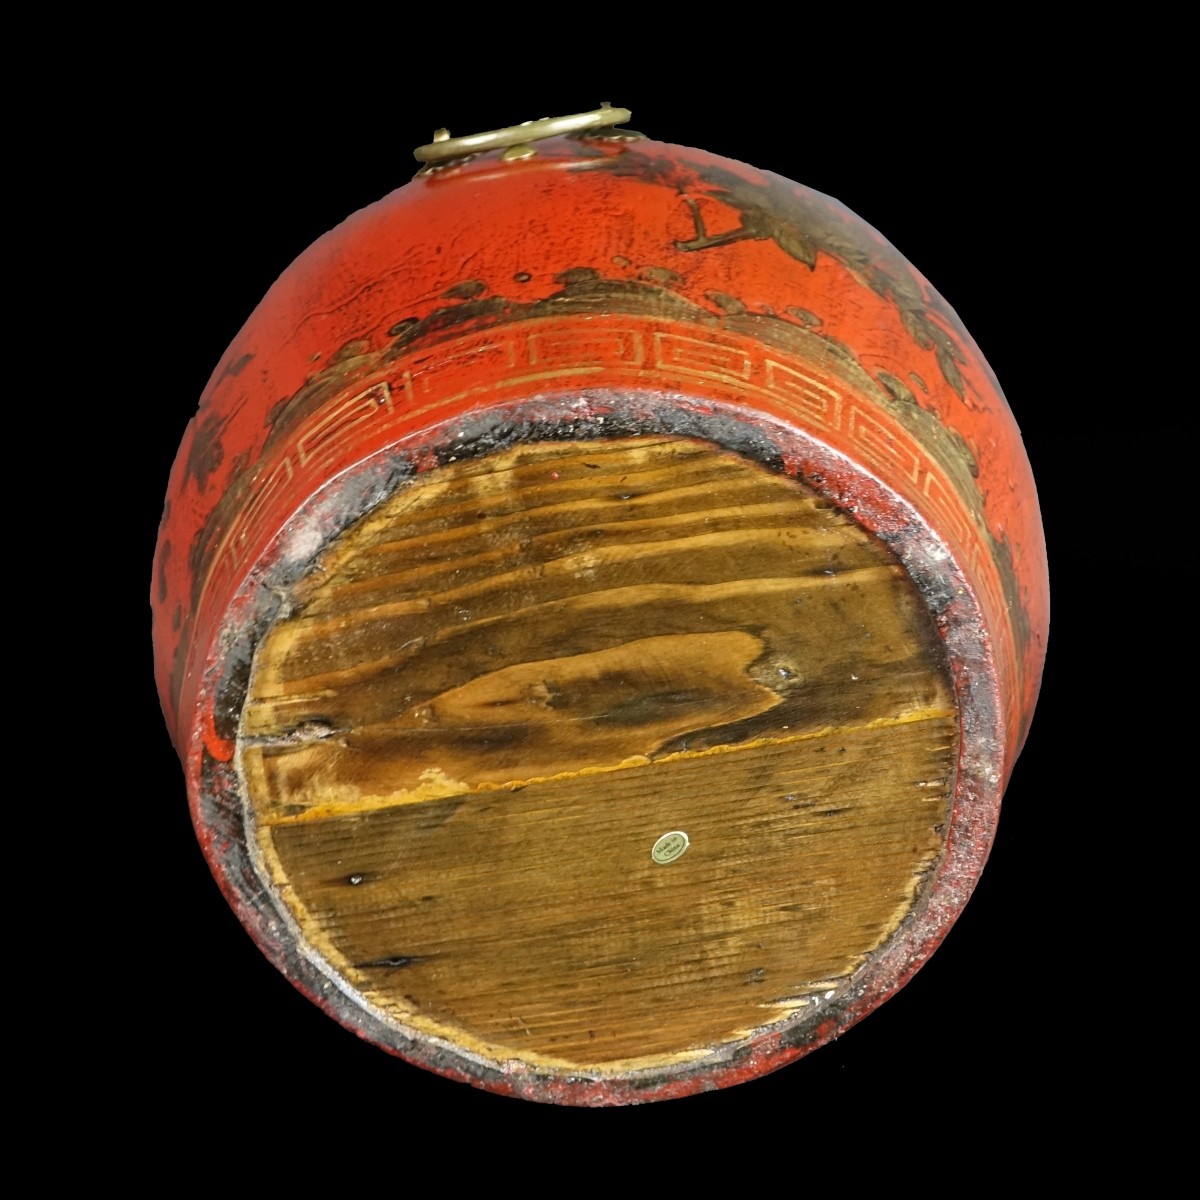 Antique Chinese Covered Rice Container